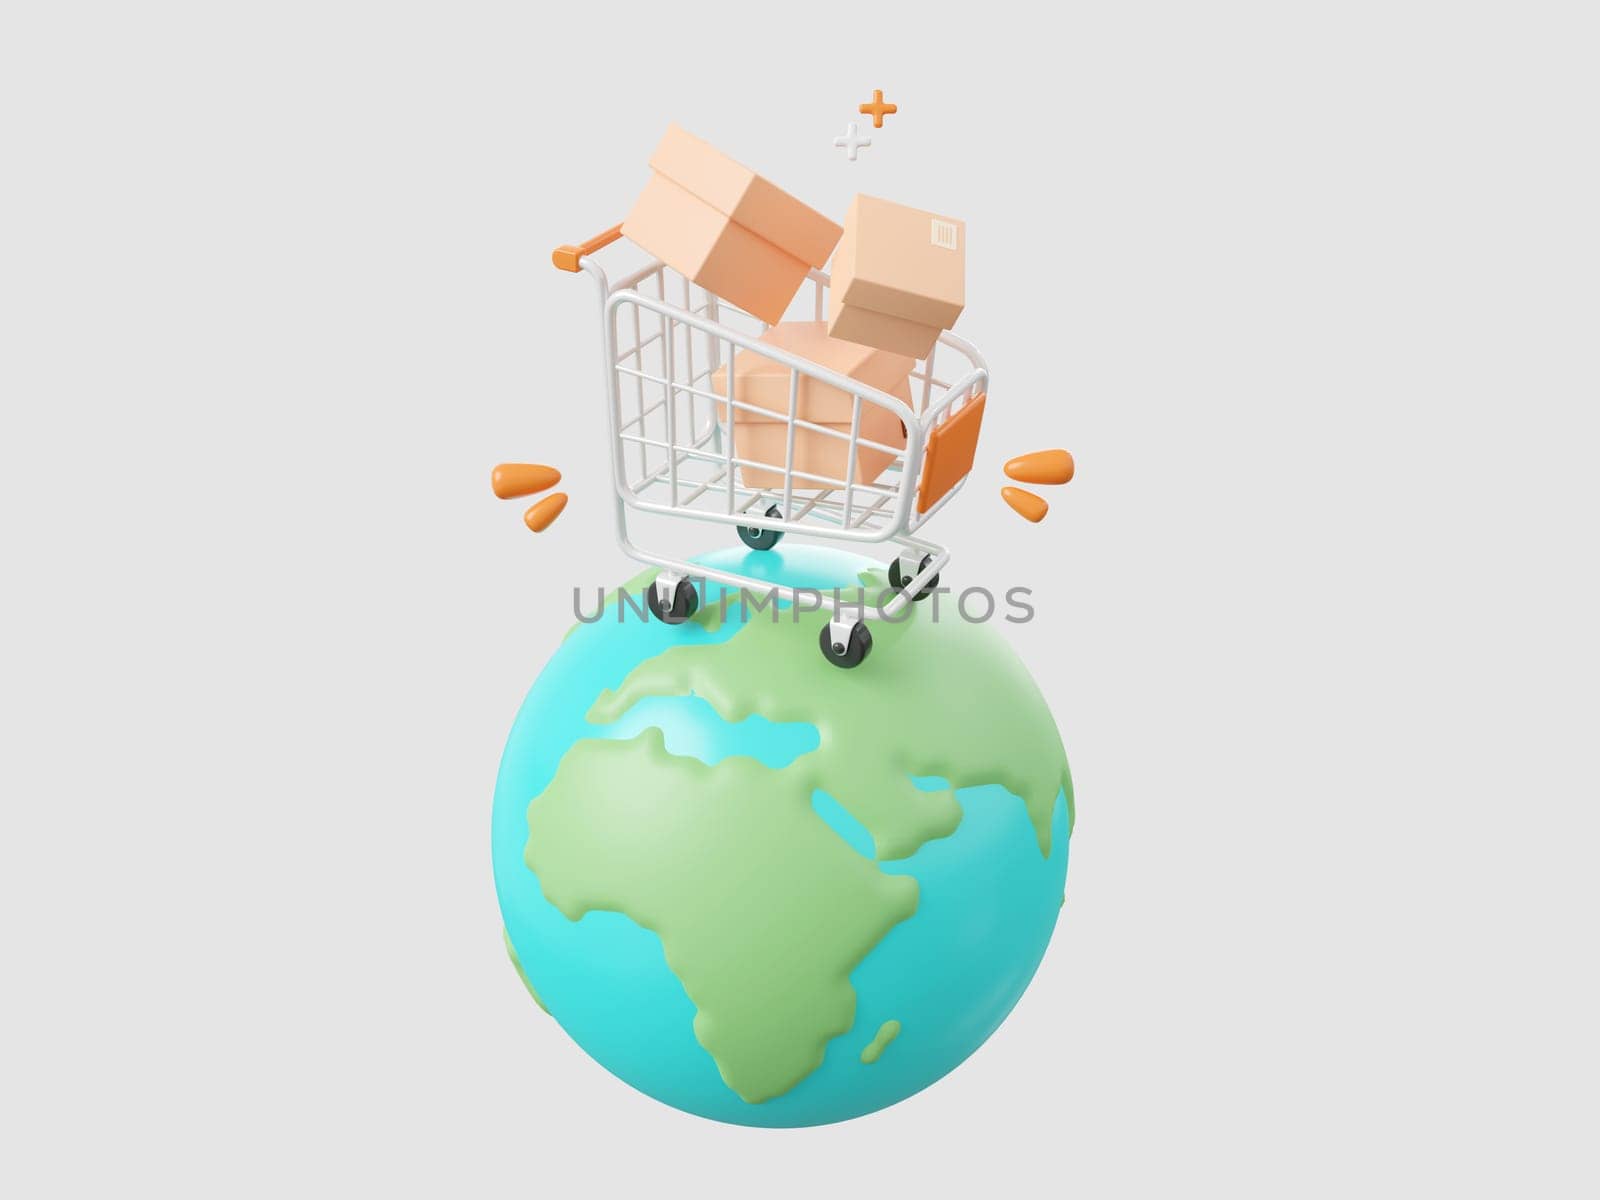 3d cartoon design illustration of Parcel boxes in shopping cart on globe, Global shopping and delivery service concept. by nutzchotwarut